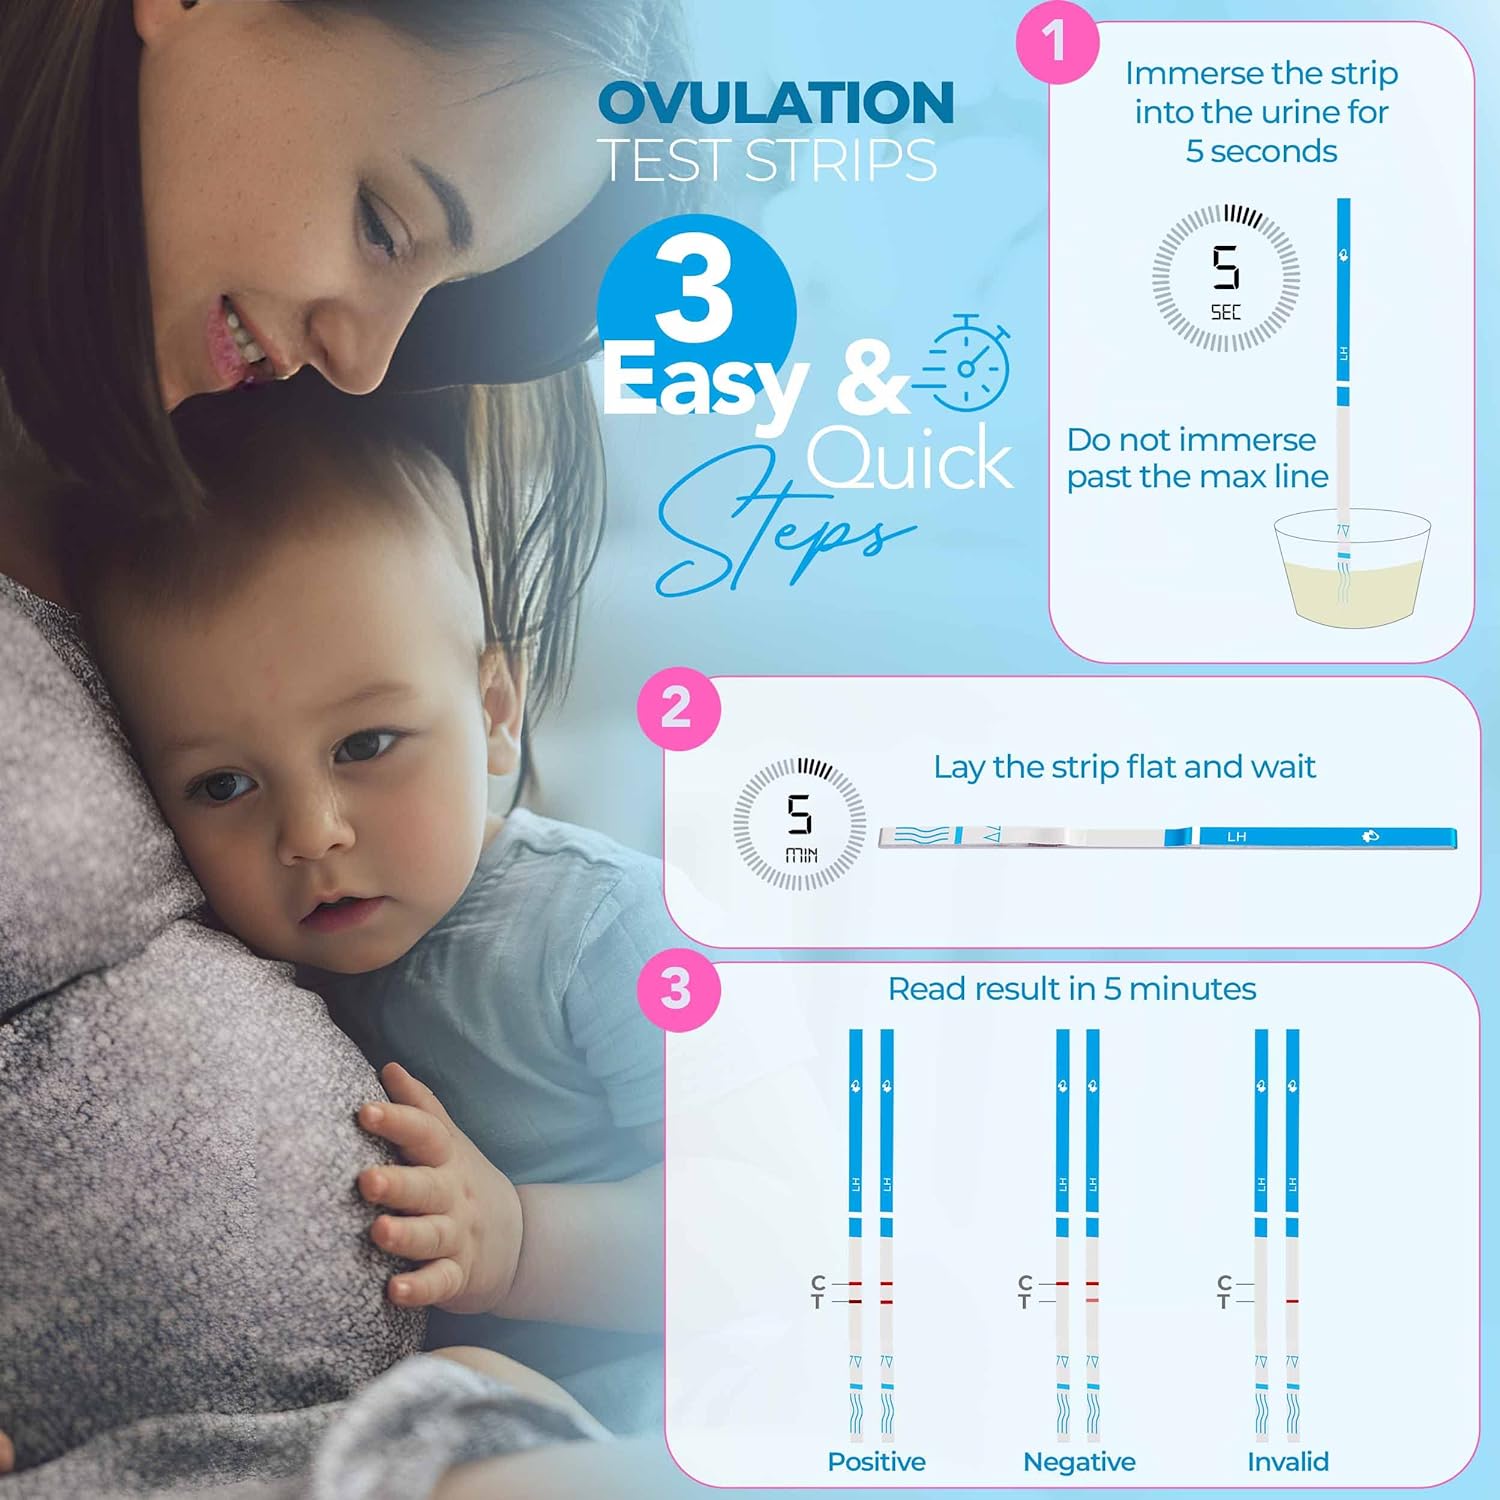 Combo Ovulation and Pregnancy Urine Test Strips Image 2 - Ovulation Test User's Guide